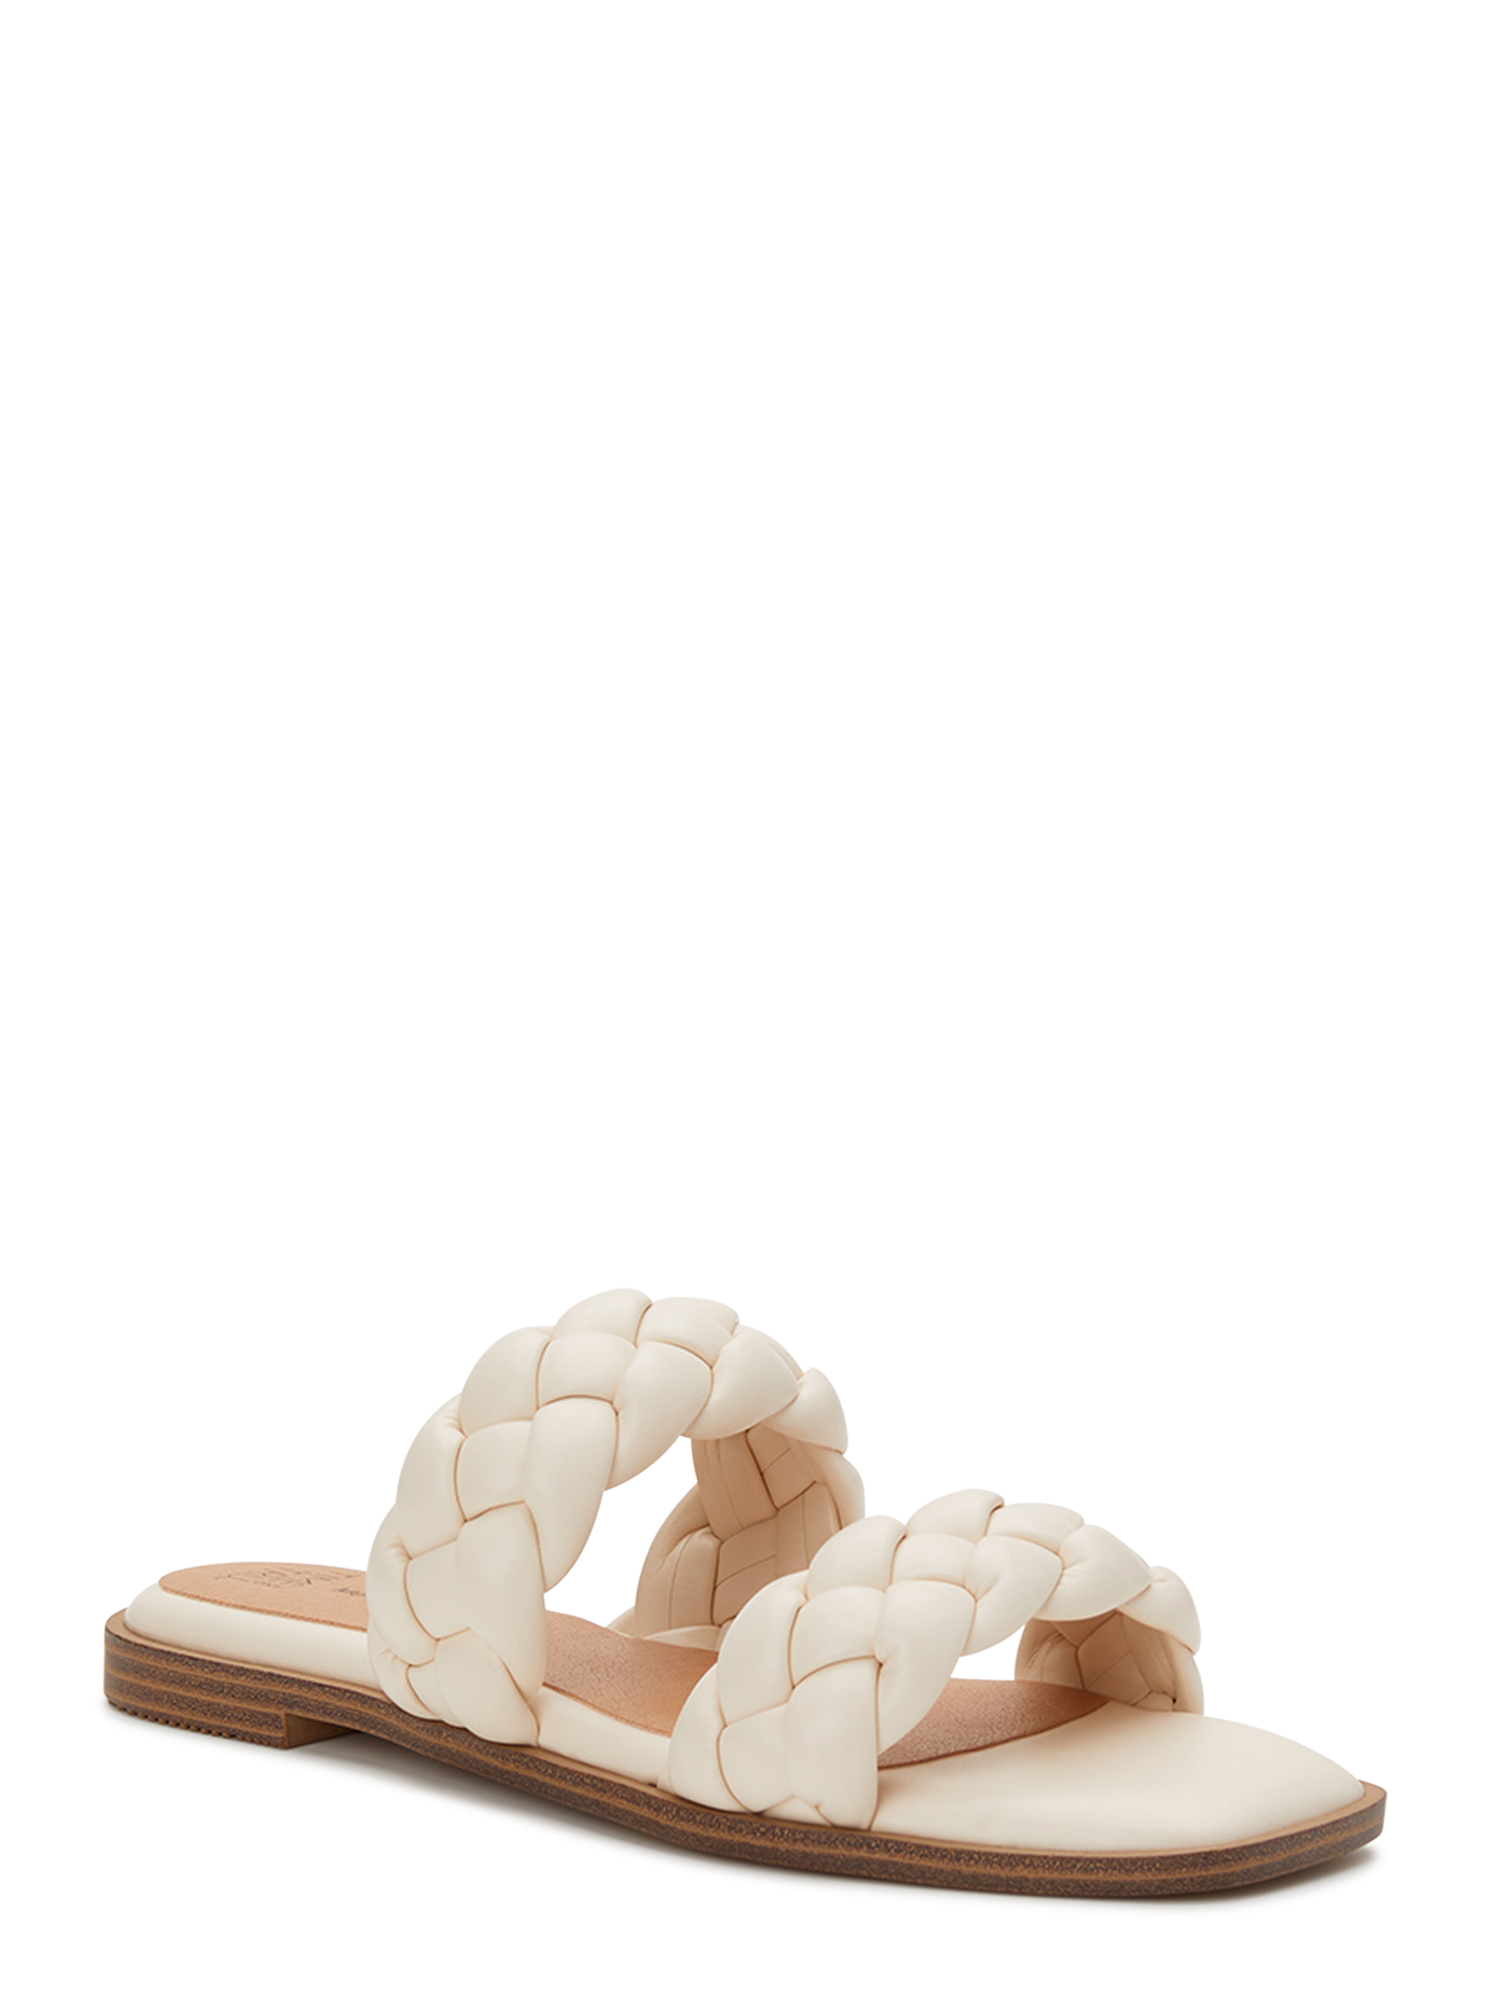 Time and Tru Women's Braided Two Band Sandals - image 1 of 5